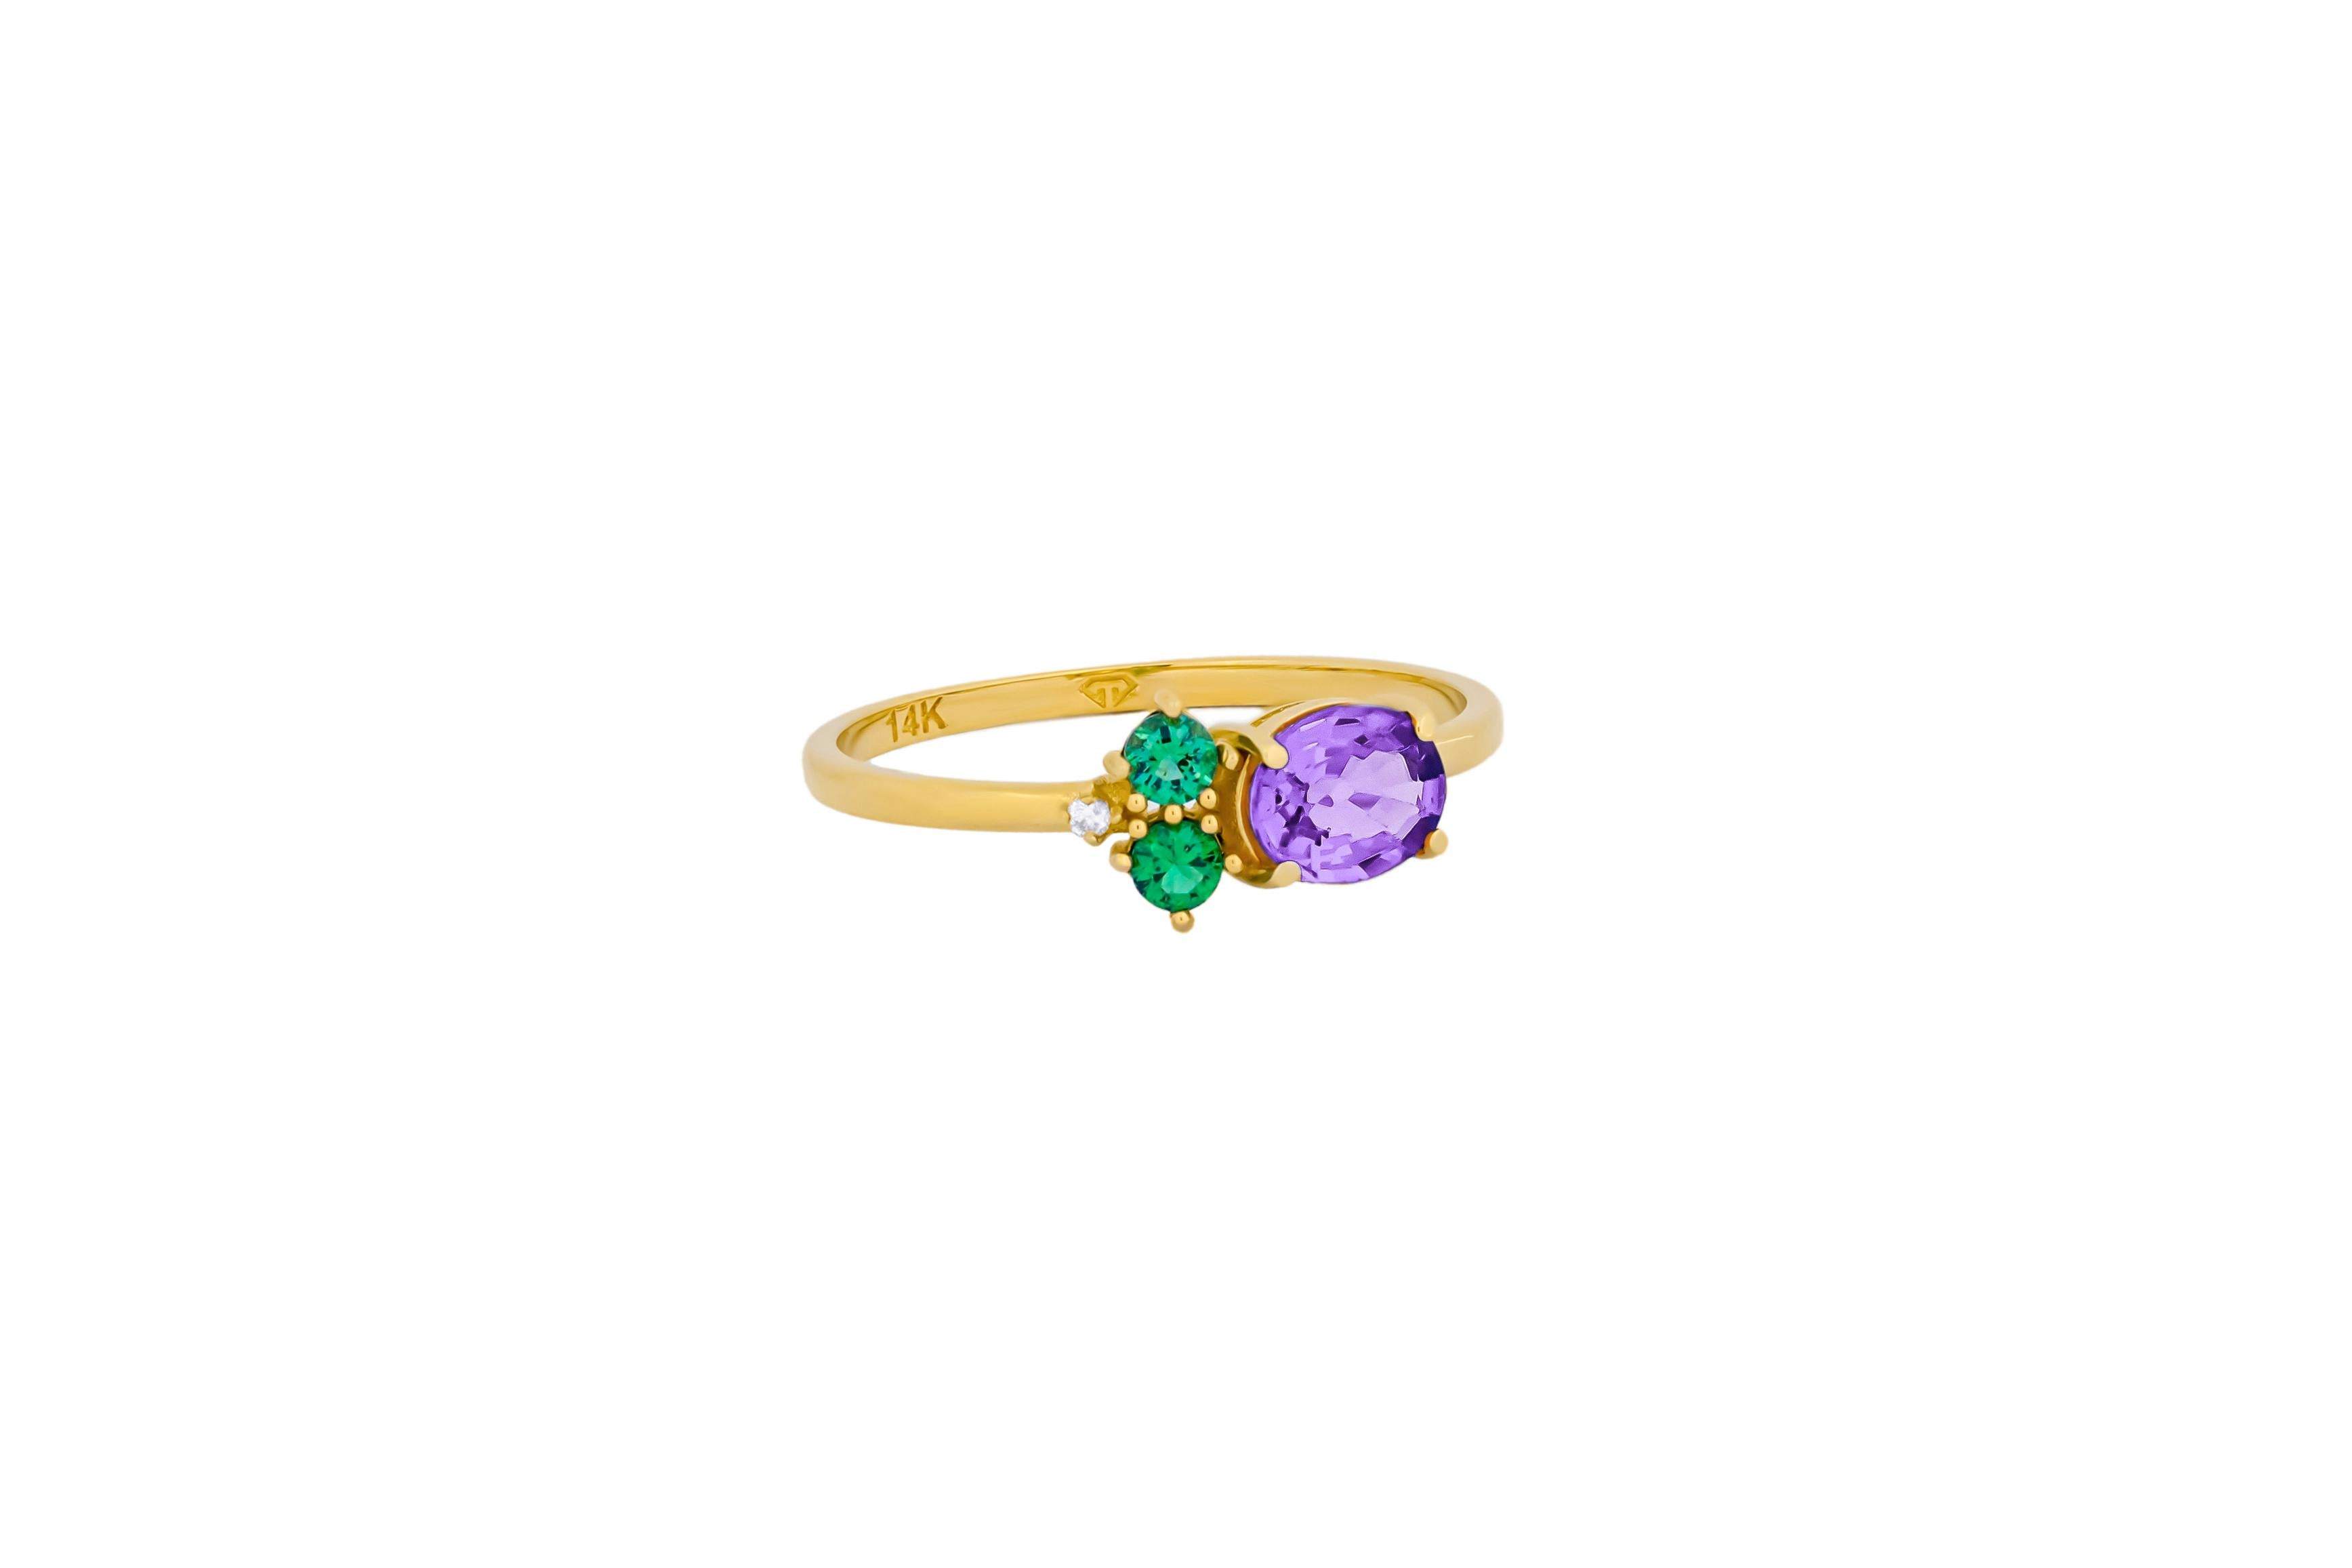 For Sale:  Oval amethyst, tsavorite and diamonds 14k gold ring. 4